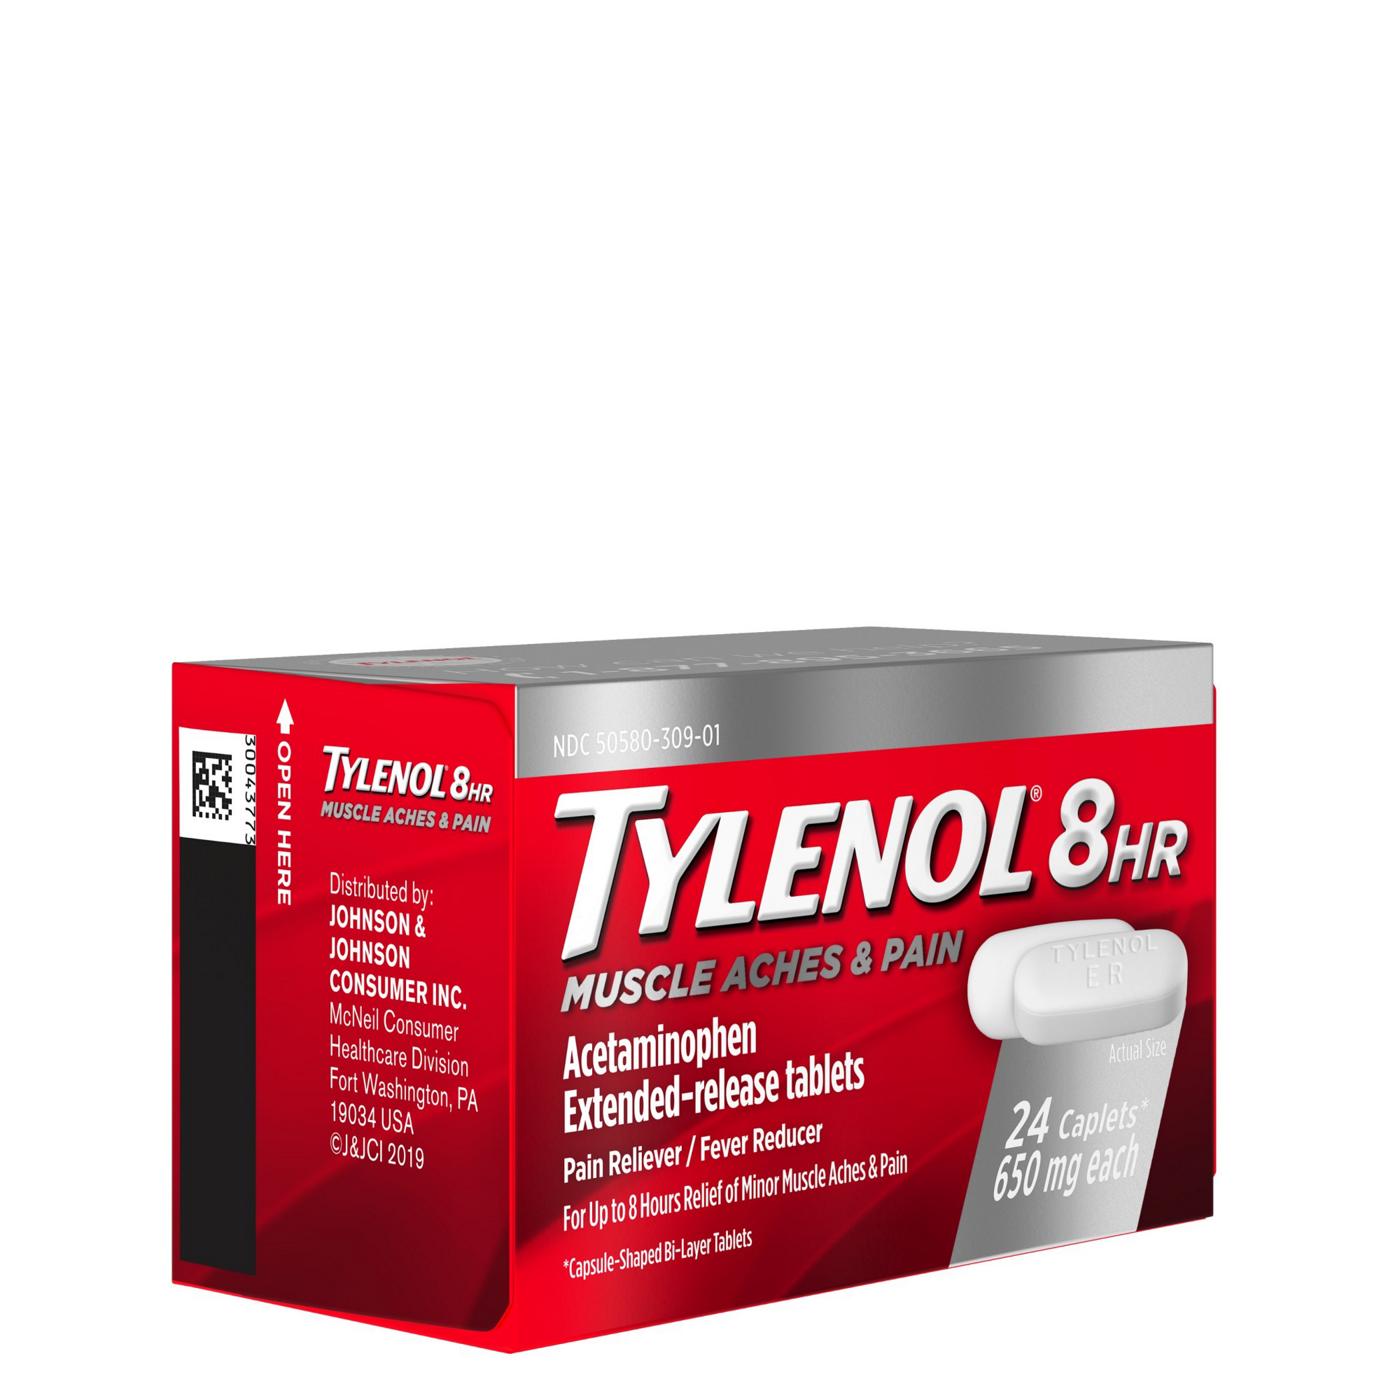 Tylenol 8 HR Muscle Aches & Pains - 650 mg; image 7 of 8